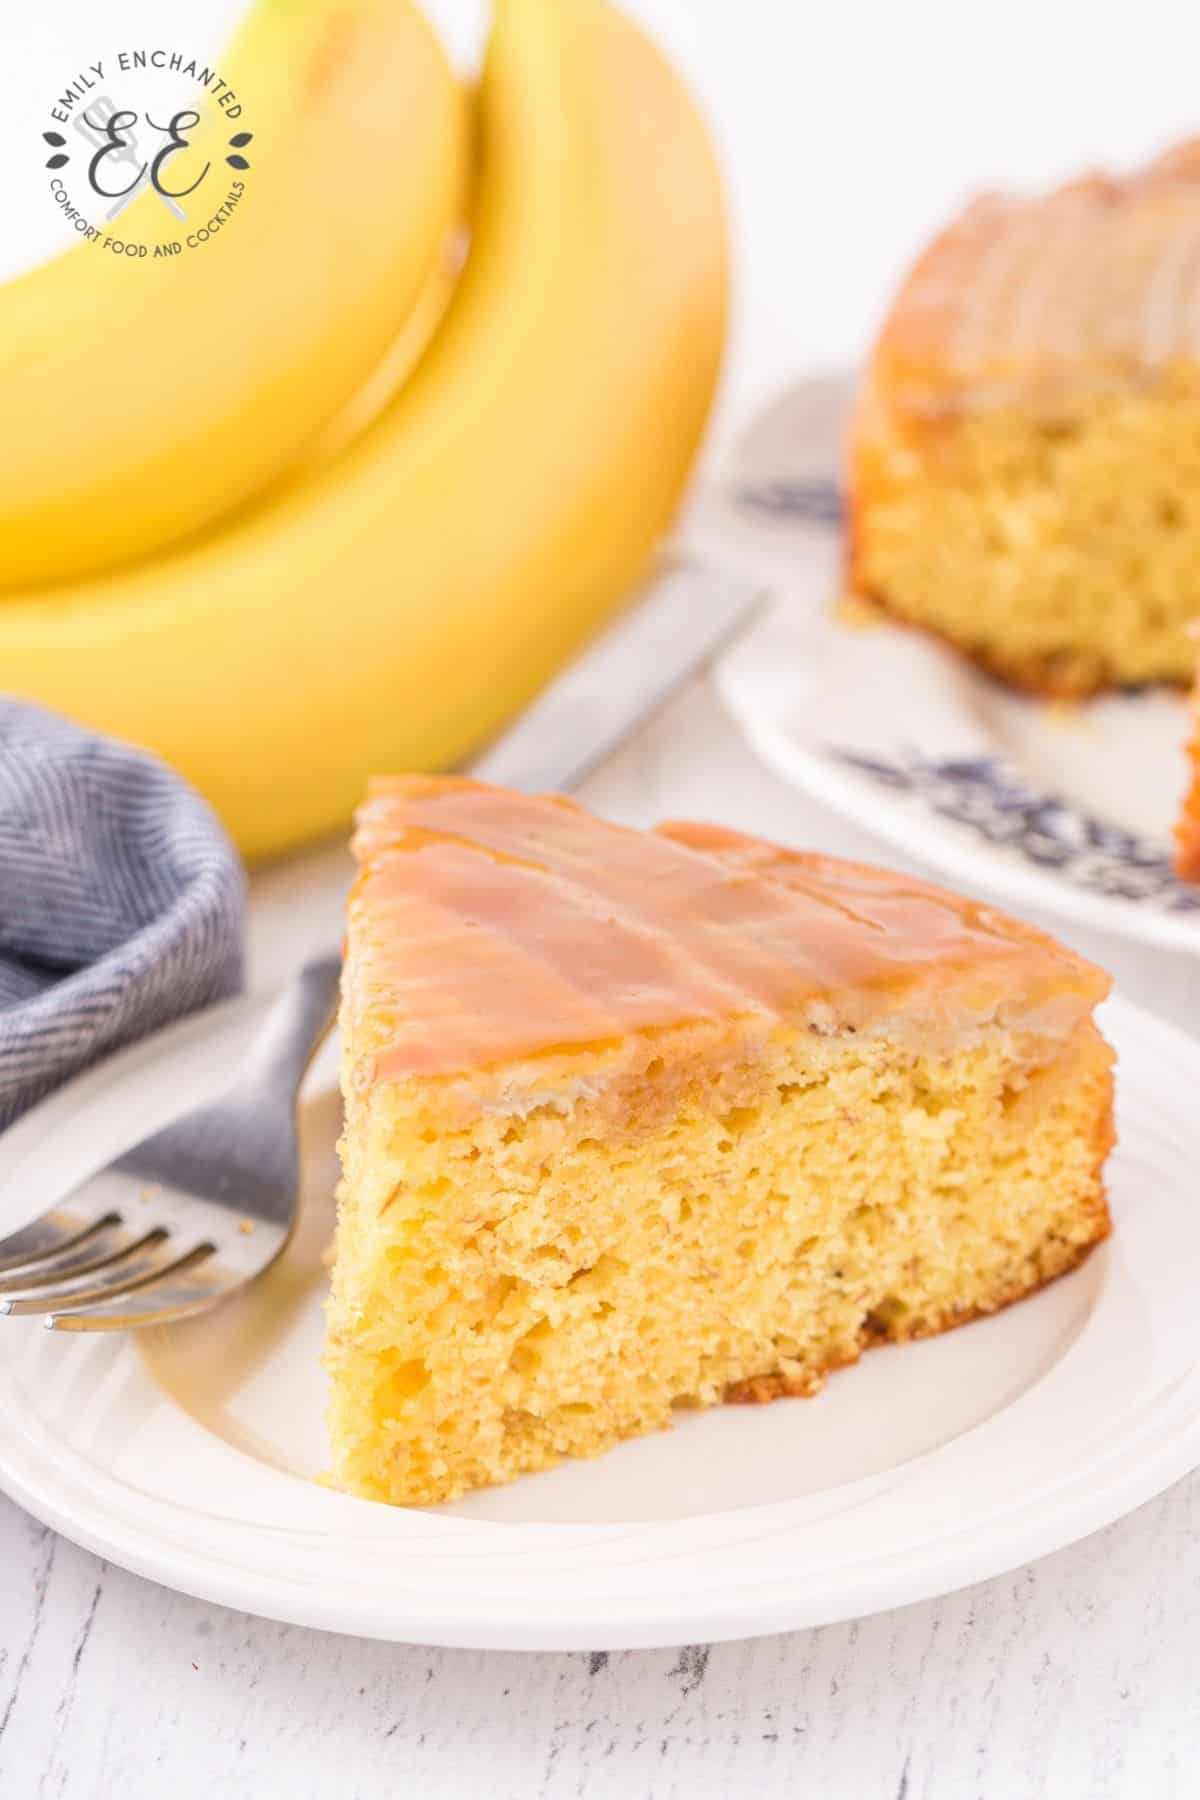 Slice of Banana Upside Down Cake on a dessert plate with a fork resting next to it